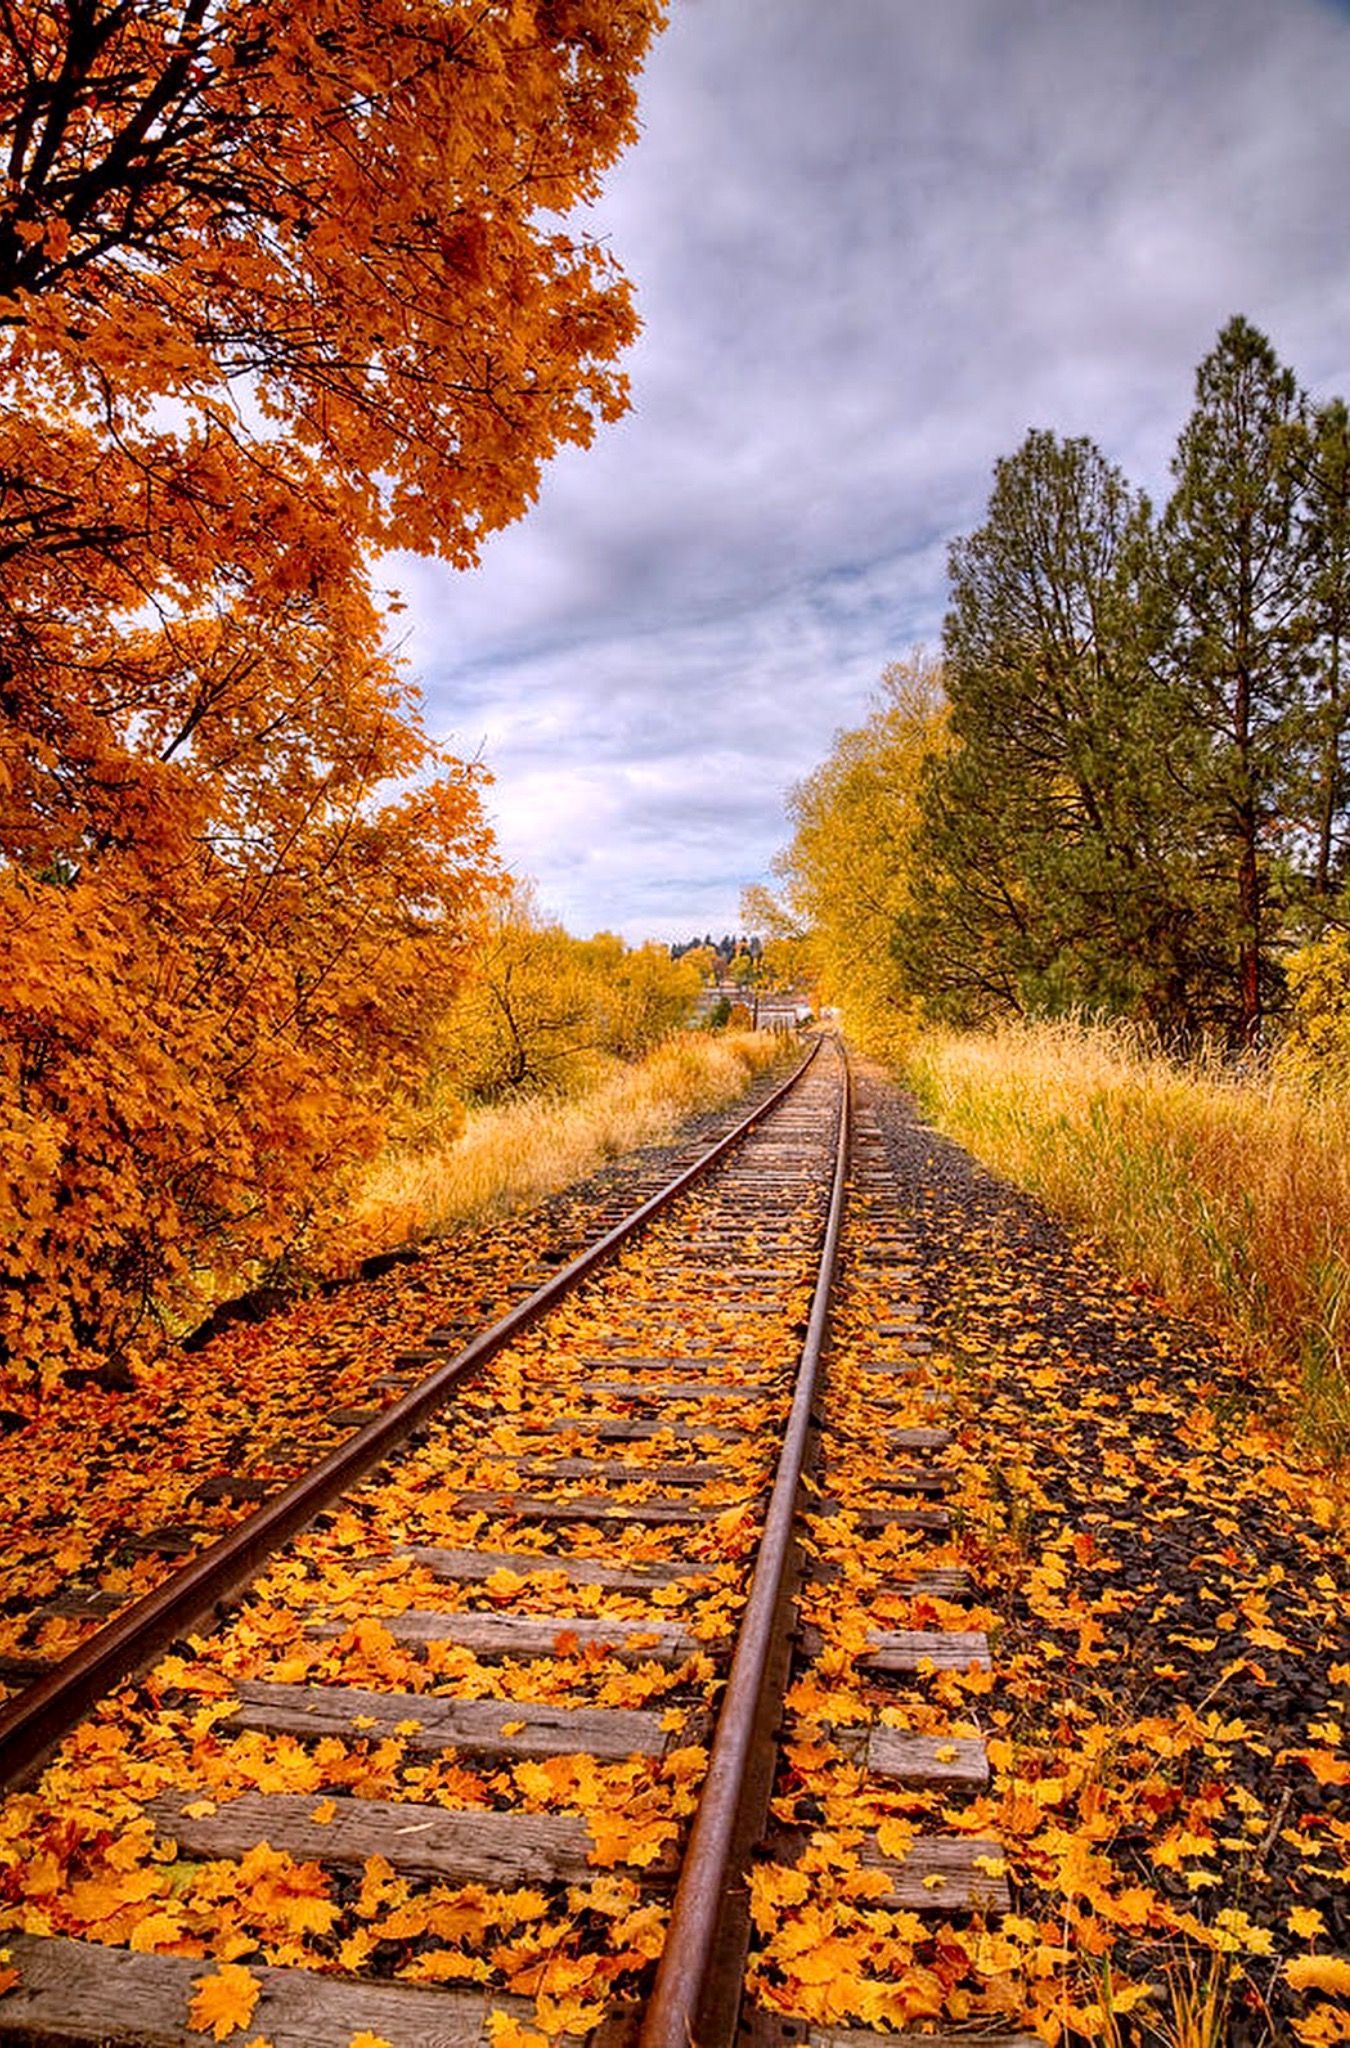 Autumn color on the railroad tracks. Located in downtown Pullman, Washington. Photo by David Patterson. Source. Railroad tracks, Autumn scenery, Scenic railroads